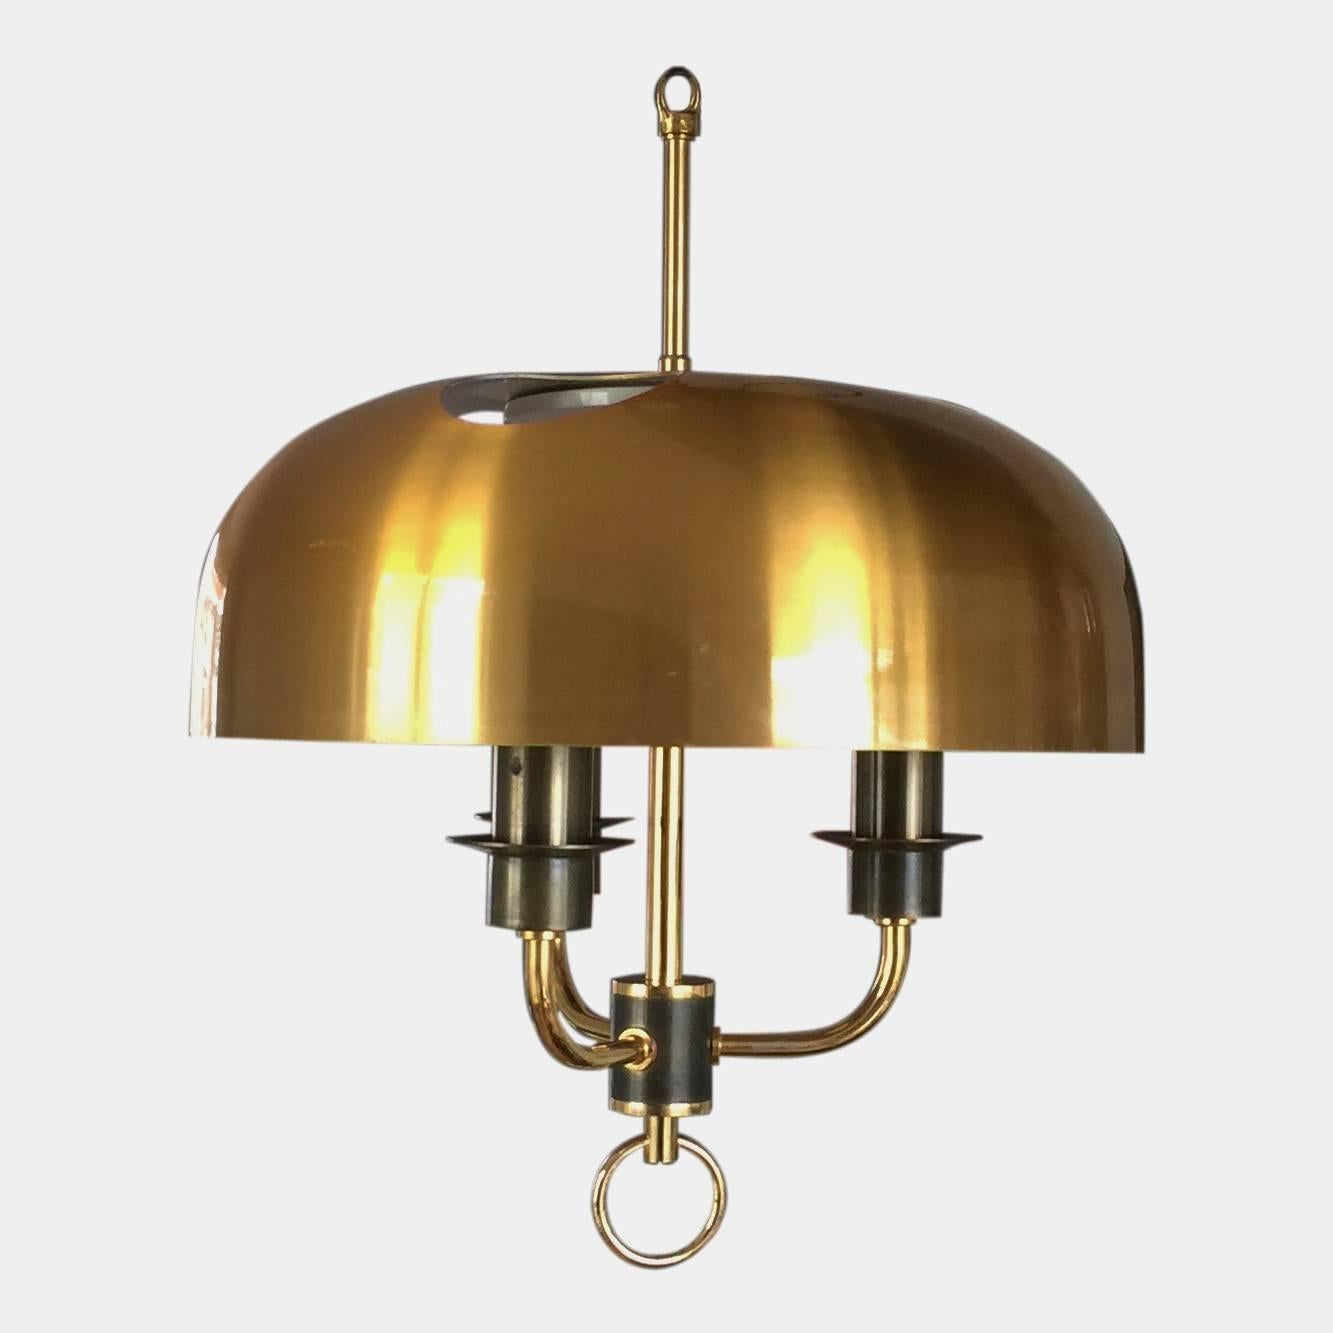 petite chandelier with refined details
three lights
attributed to Hans Agne Jakobsson
in very good vintage condition
some minor surface marks
European sockets and wiring
this item will ship from France
Price does not include handling,